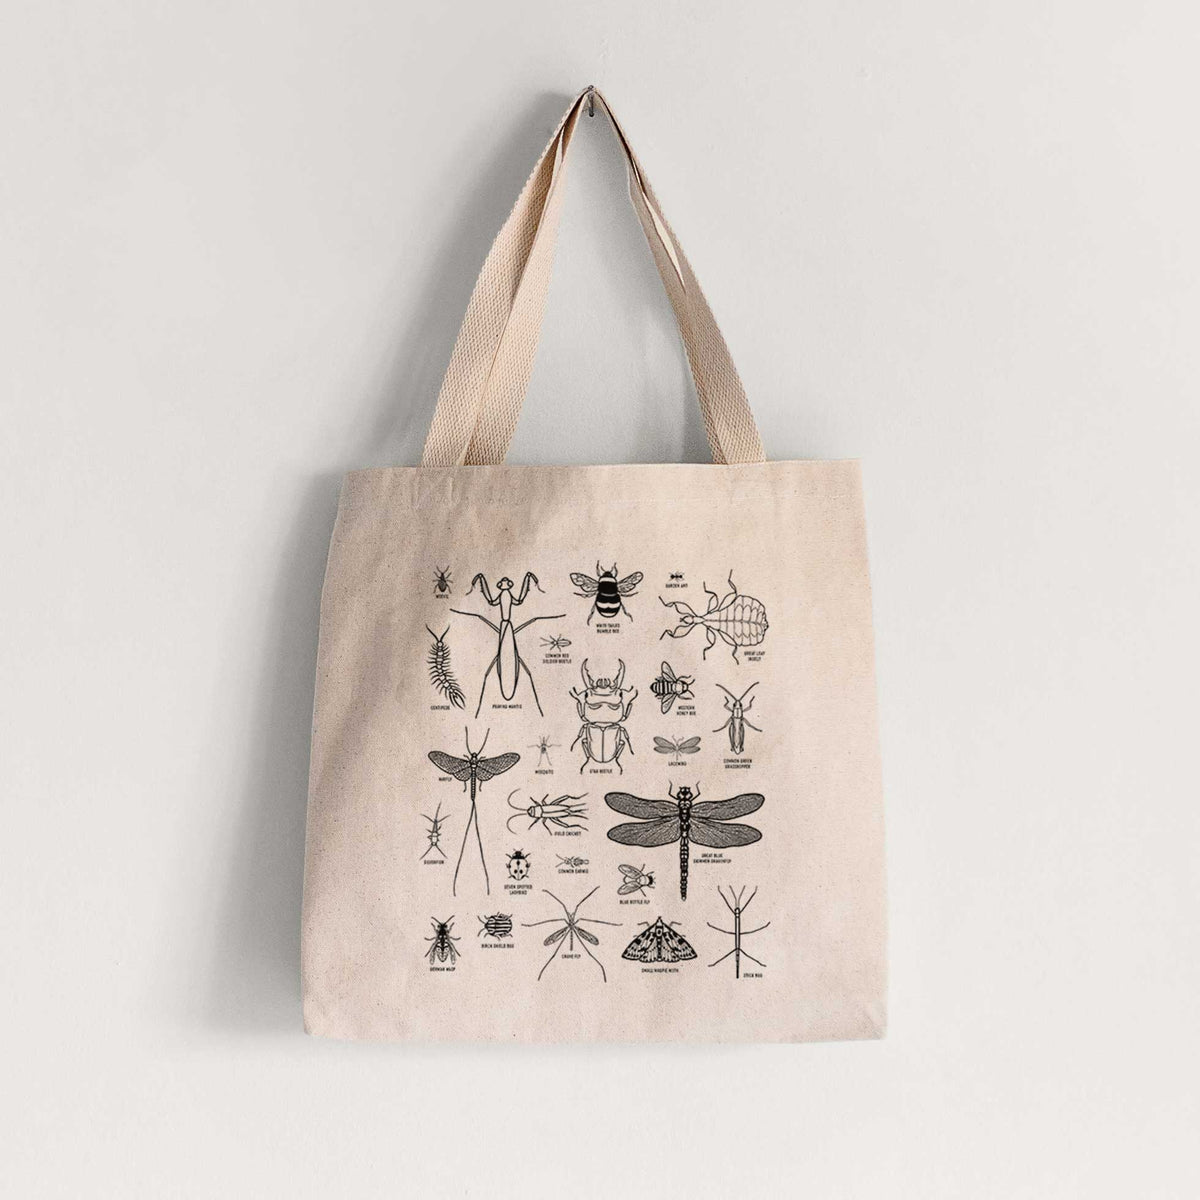 Chart of Arthropods/Insects - Tote Bag